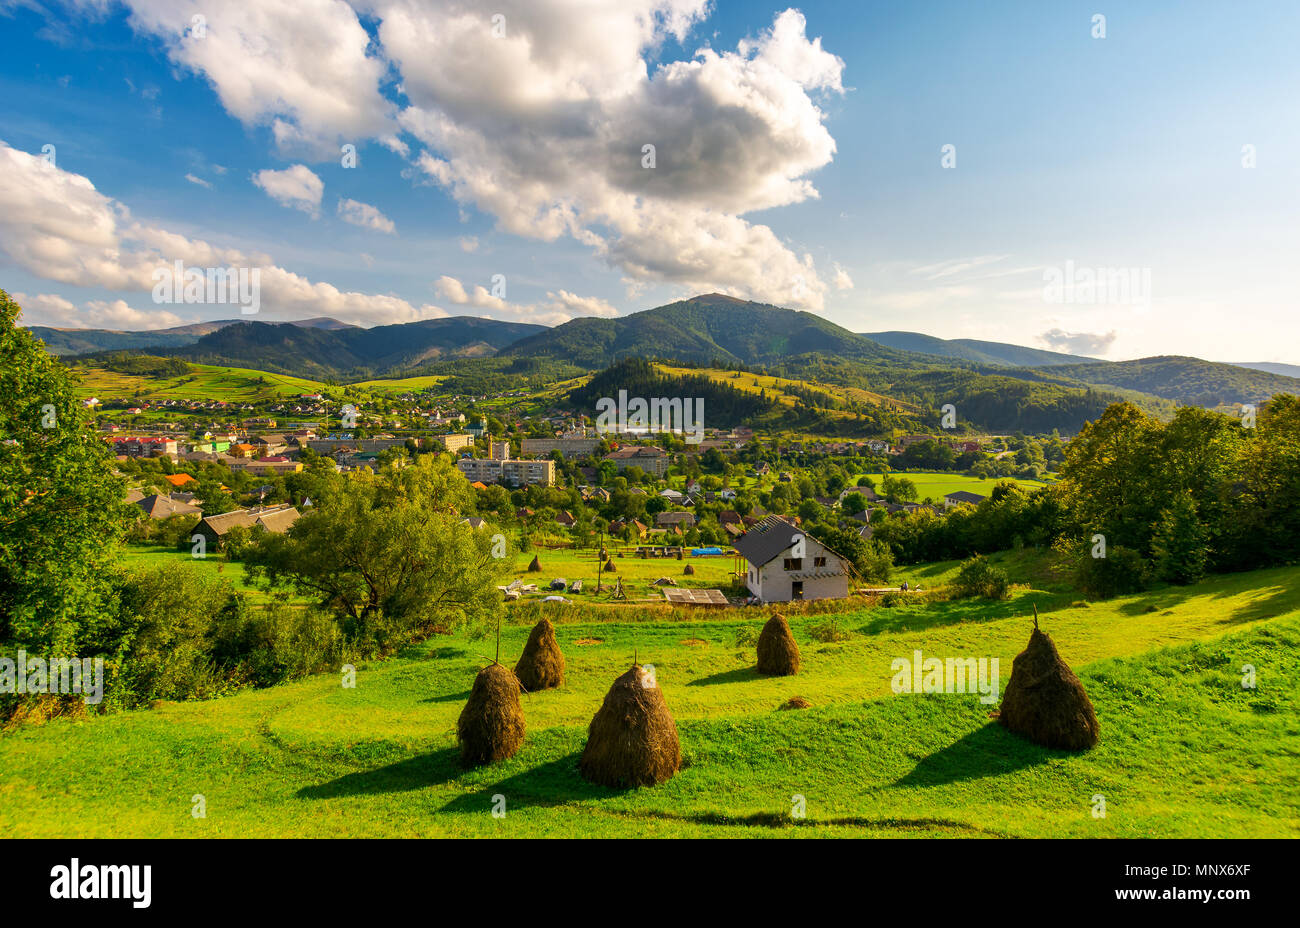 beautiful rural landscape in mountains. haystacks on the grassy hills. village at the foot of the mountain. interesting cloud formation over the ridge Stock Photo